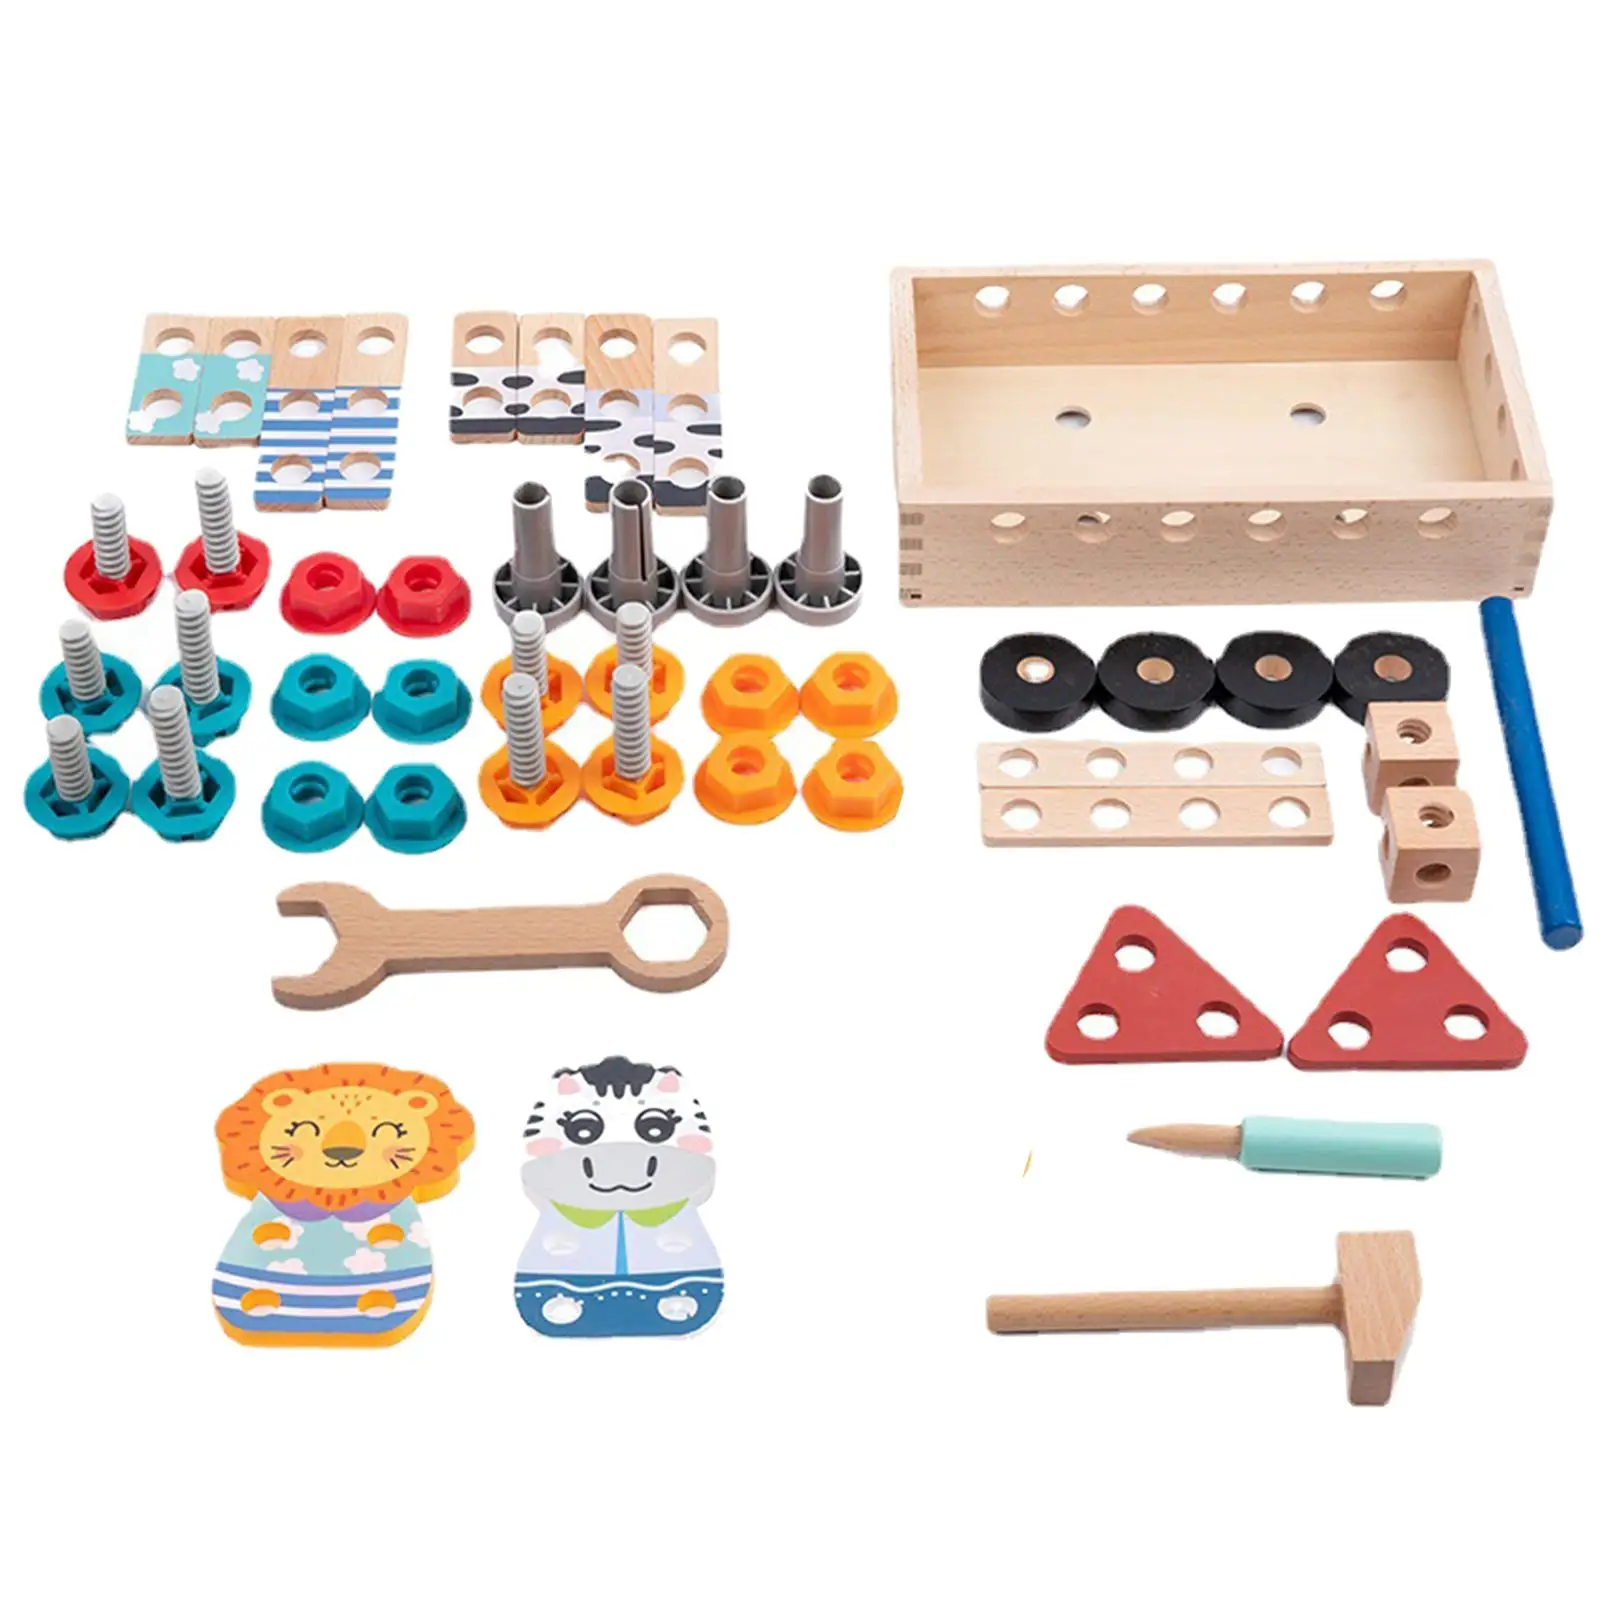 Wooden Tool Set Educational Pretend Game Toolbox Construction Building Toy for Role Play Preschool Activities Outdoor Indoor